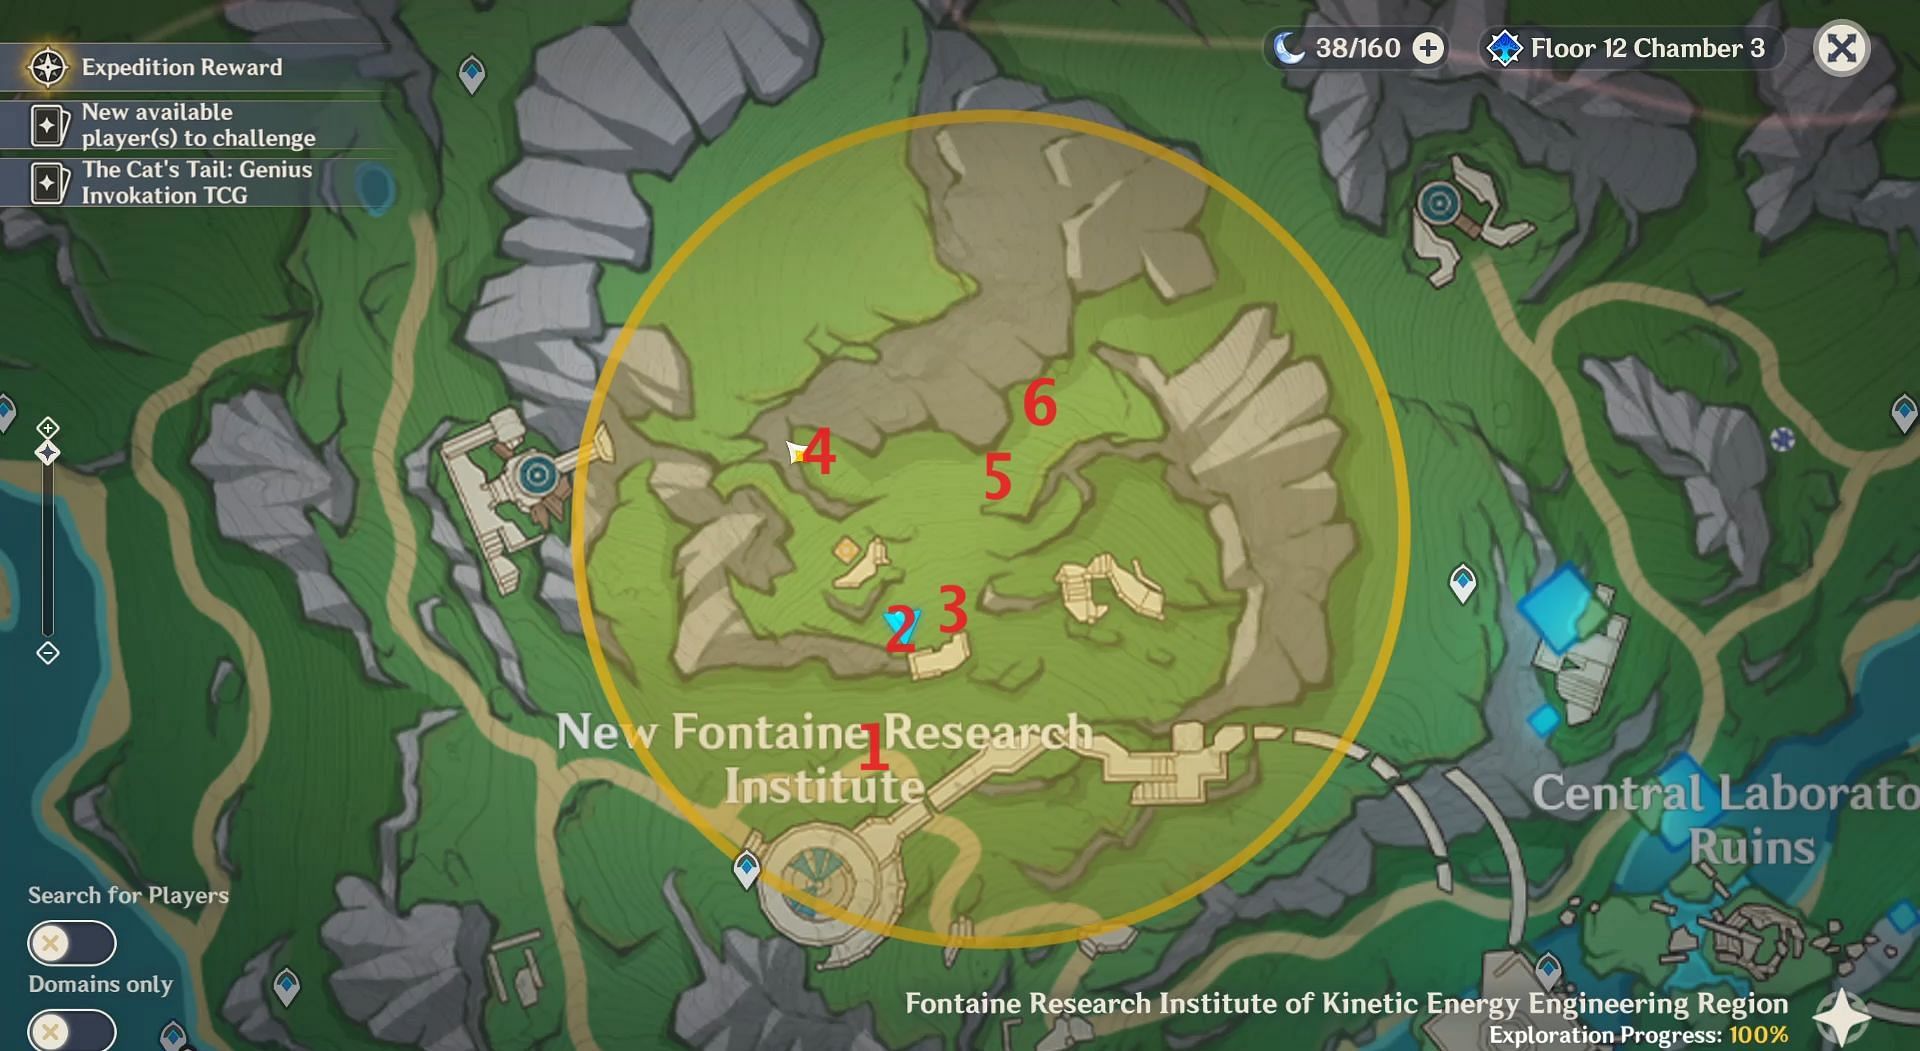 The treasure chests are buried in the New Fontaine Research Institute (Image via HoYoverse)